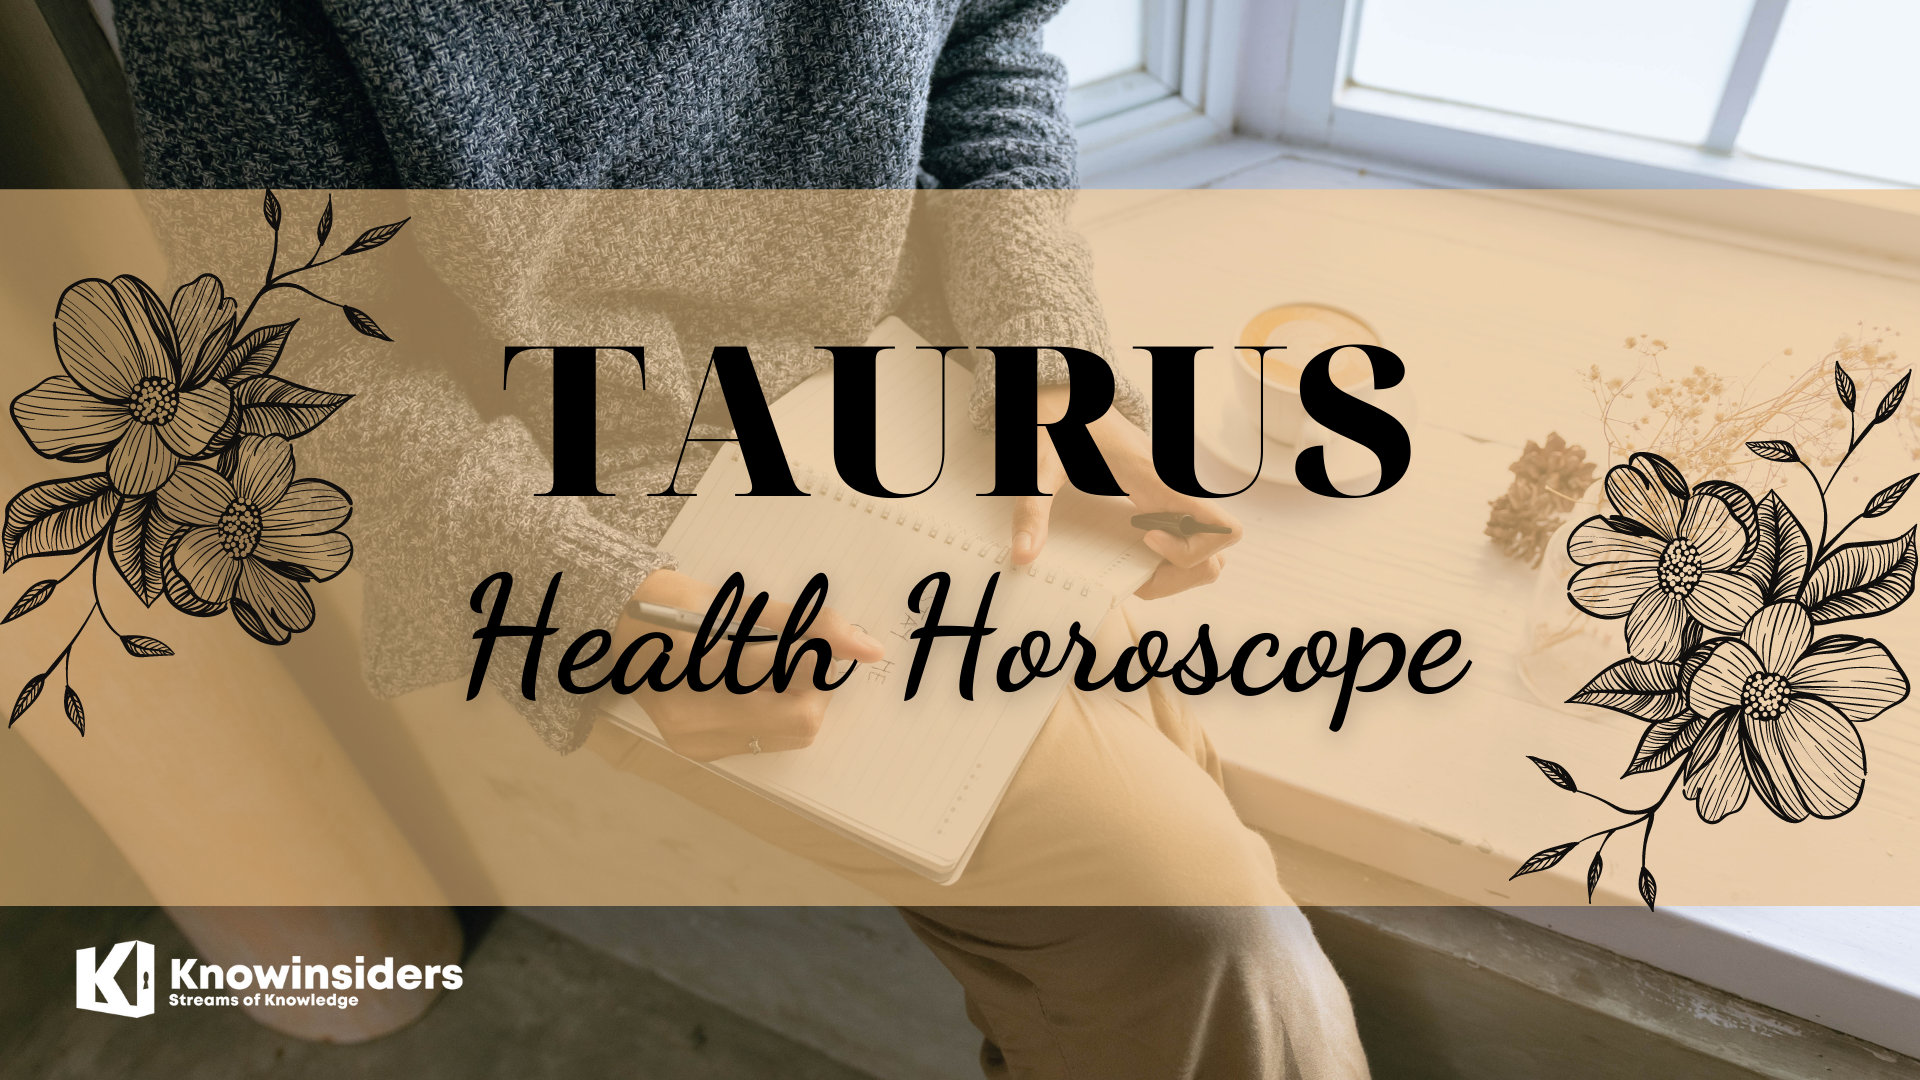 TAURUS Horoscope: Prediction for Beauty and Health - All Life